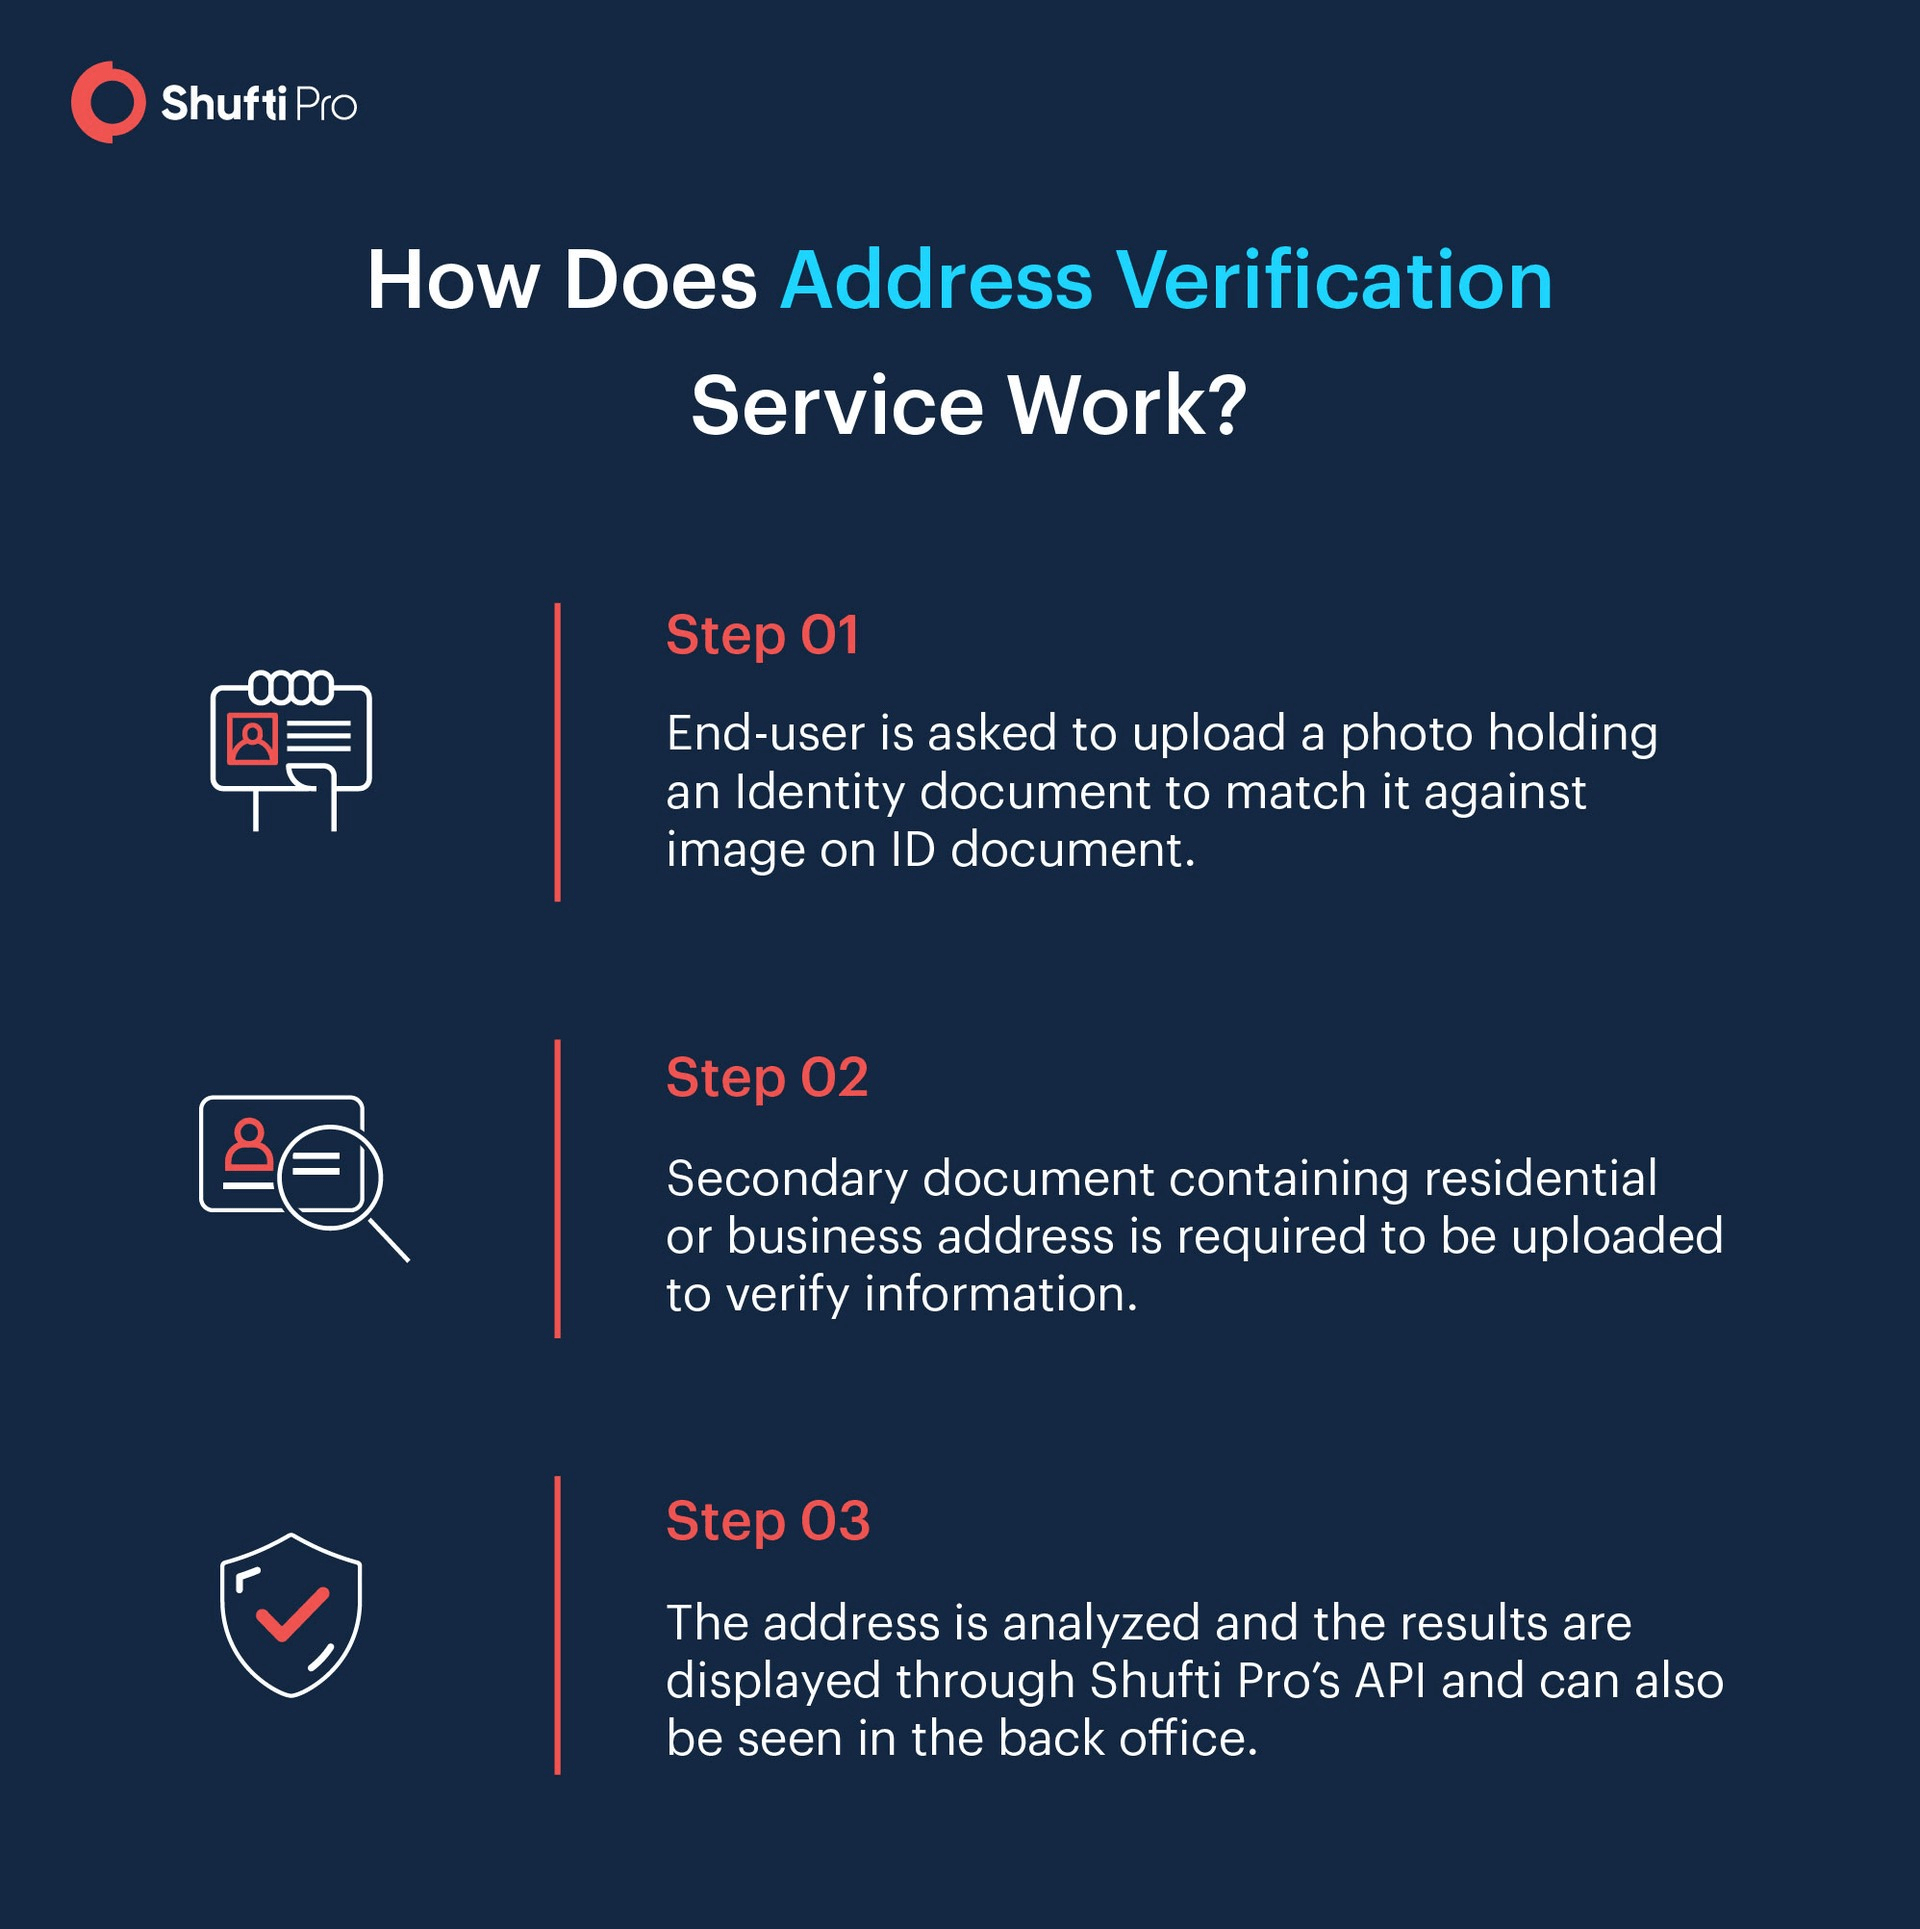 The 'What' and 'How' of Address Verification Service